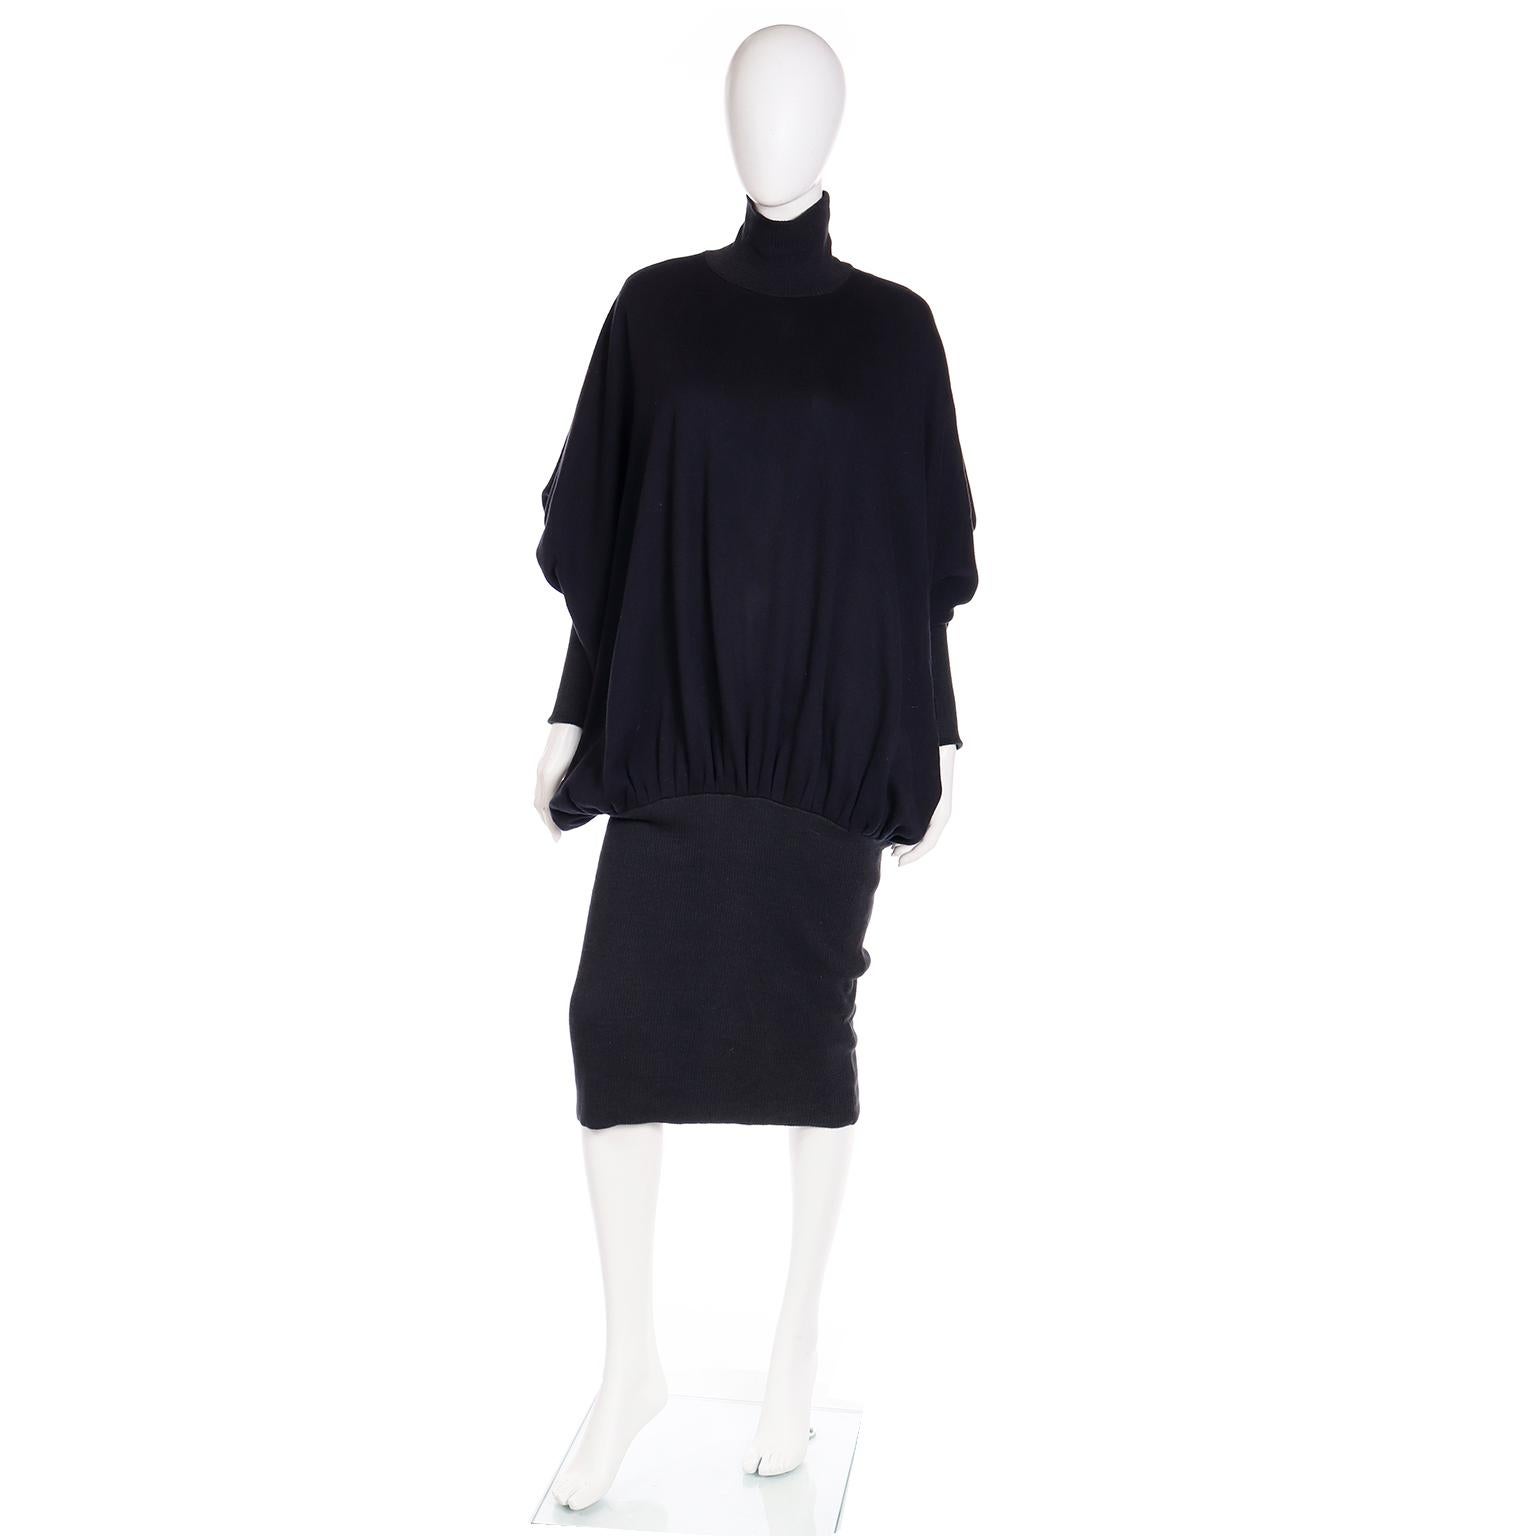 This vintage 1985 Norma Kamali sweatshirt fabric day dress is an important iconic design of Kamali's. Norma Kamali was the first American designer to design high fashion 